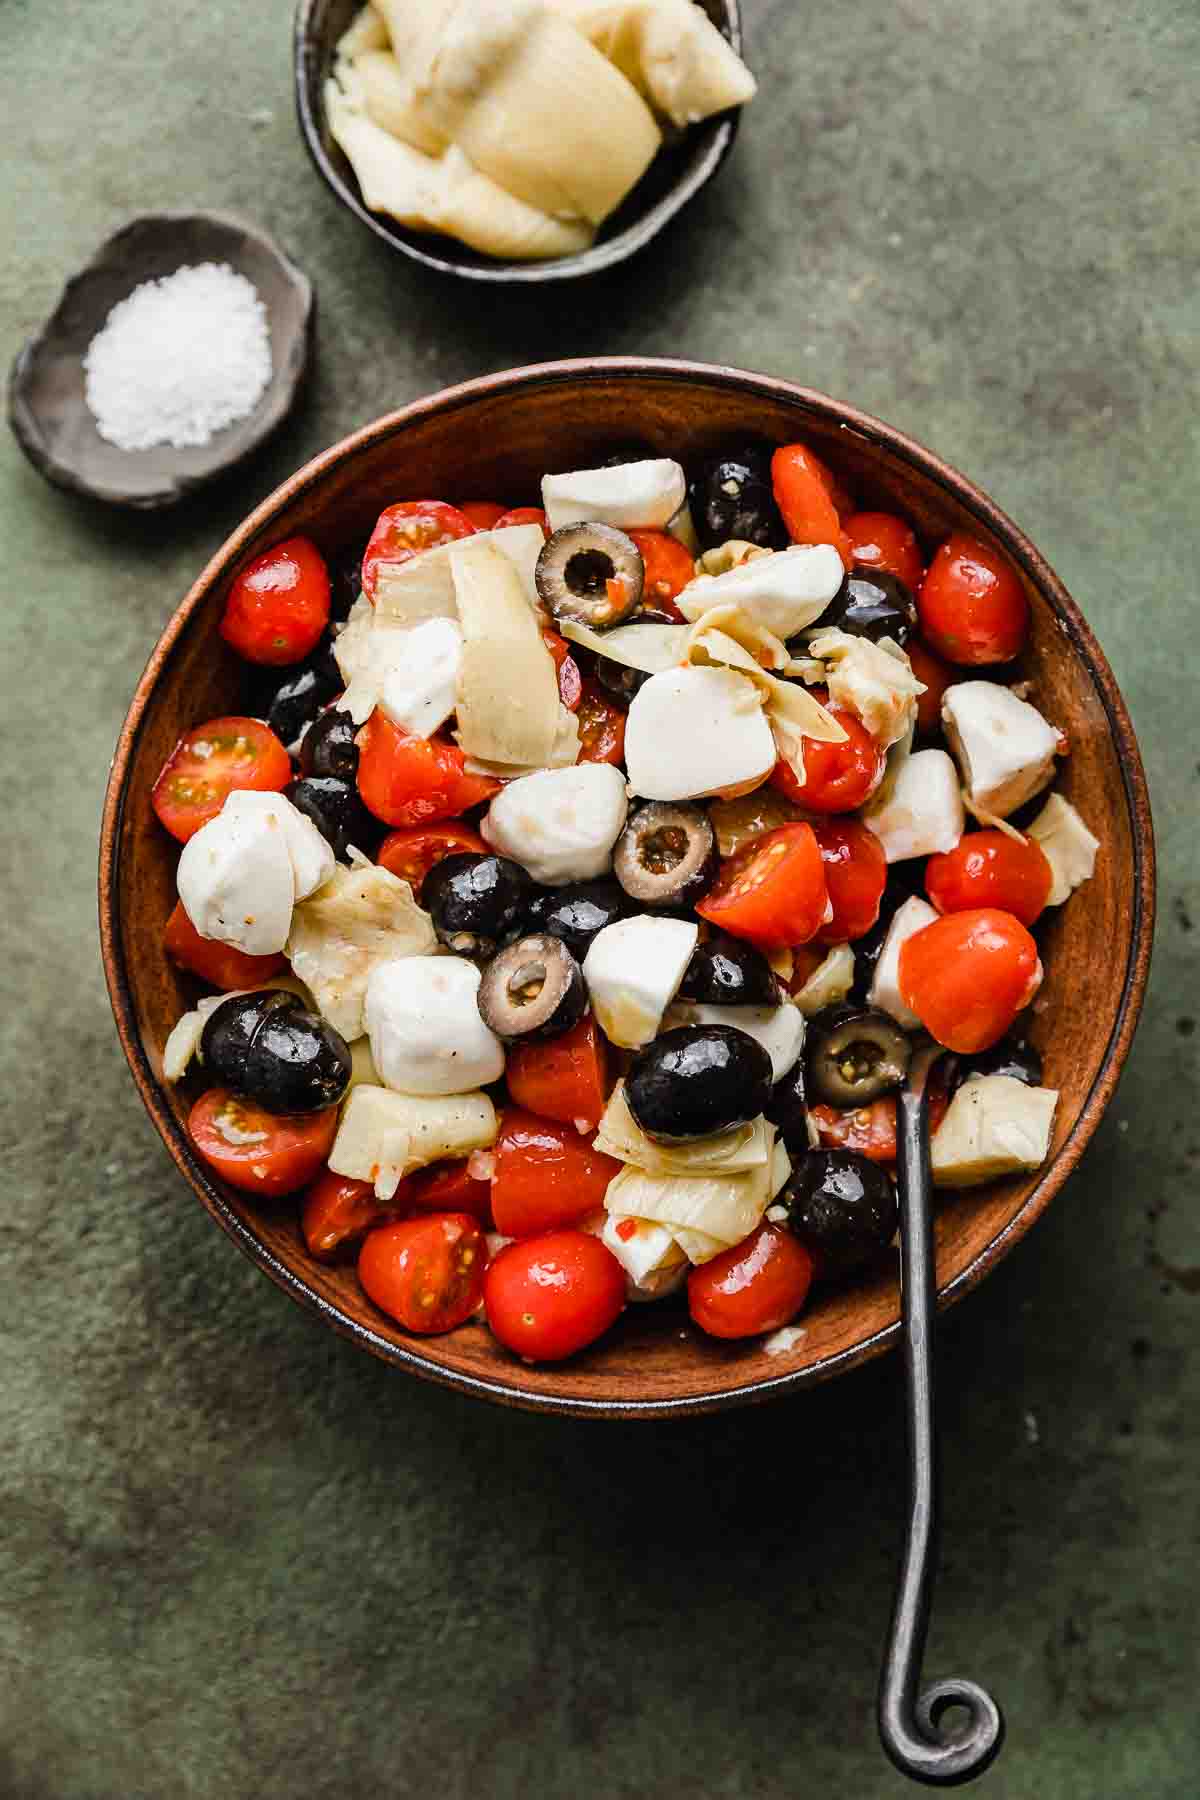 A brown bowl filled with Tomato Artichoke Salad with olives and mozzarella cheese balls, on a forest green colored background.